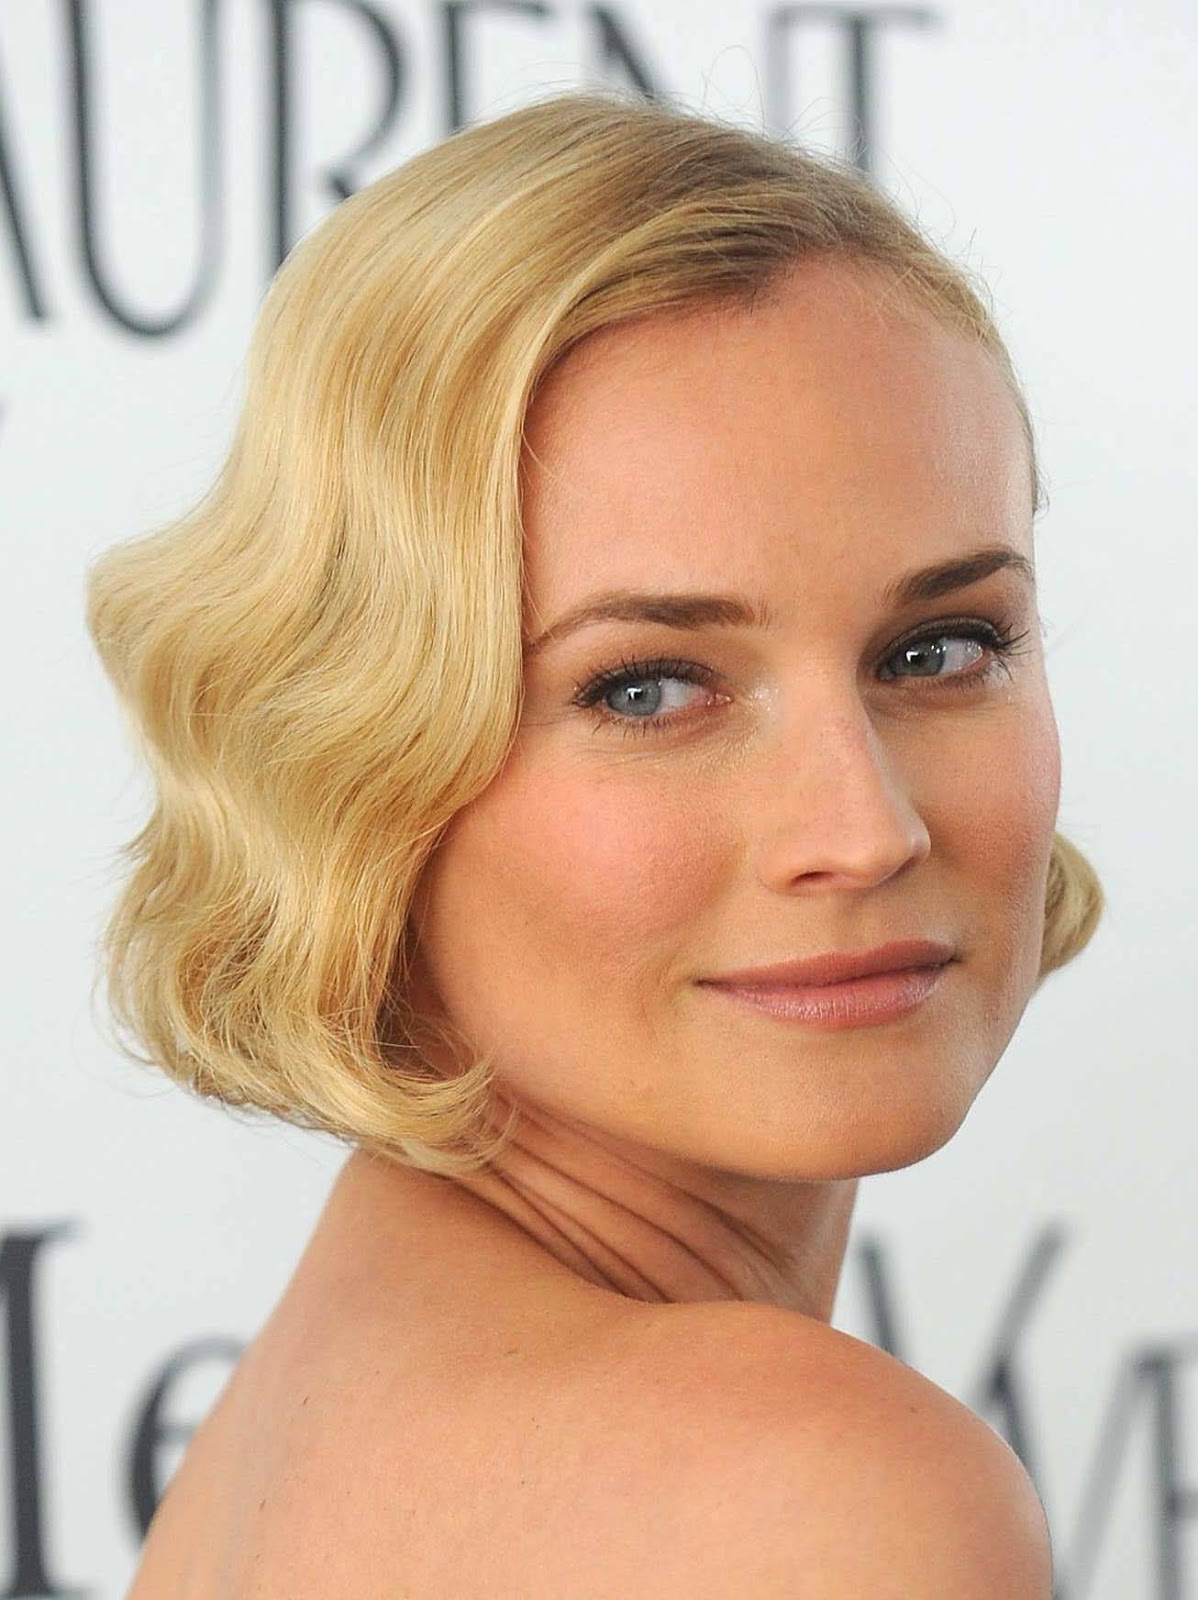 Hairstyles For Women 2013 Layers hairstyles hairstyles for 2012 bob hairstyles for medium hair 2011